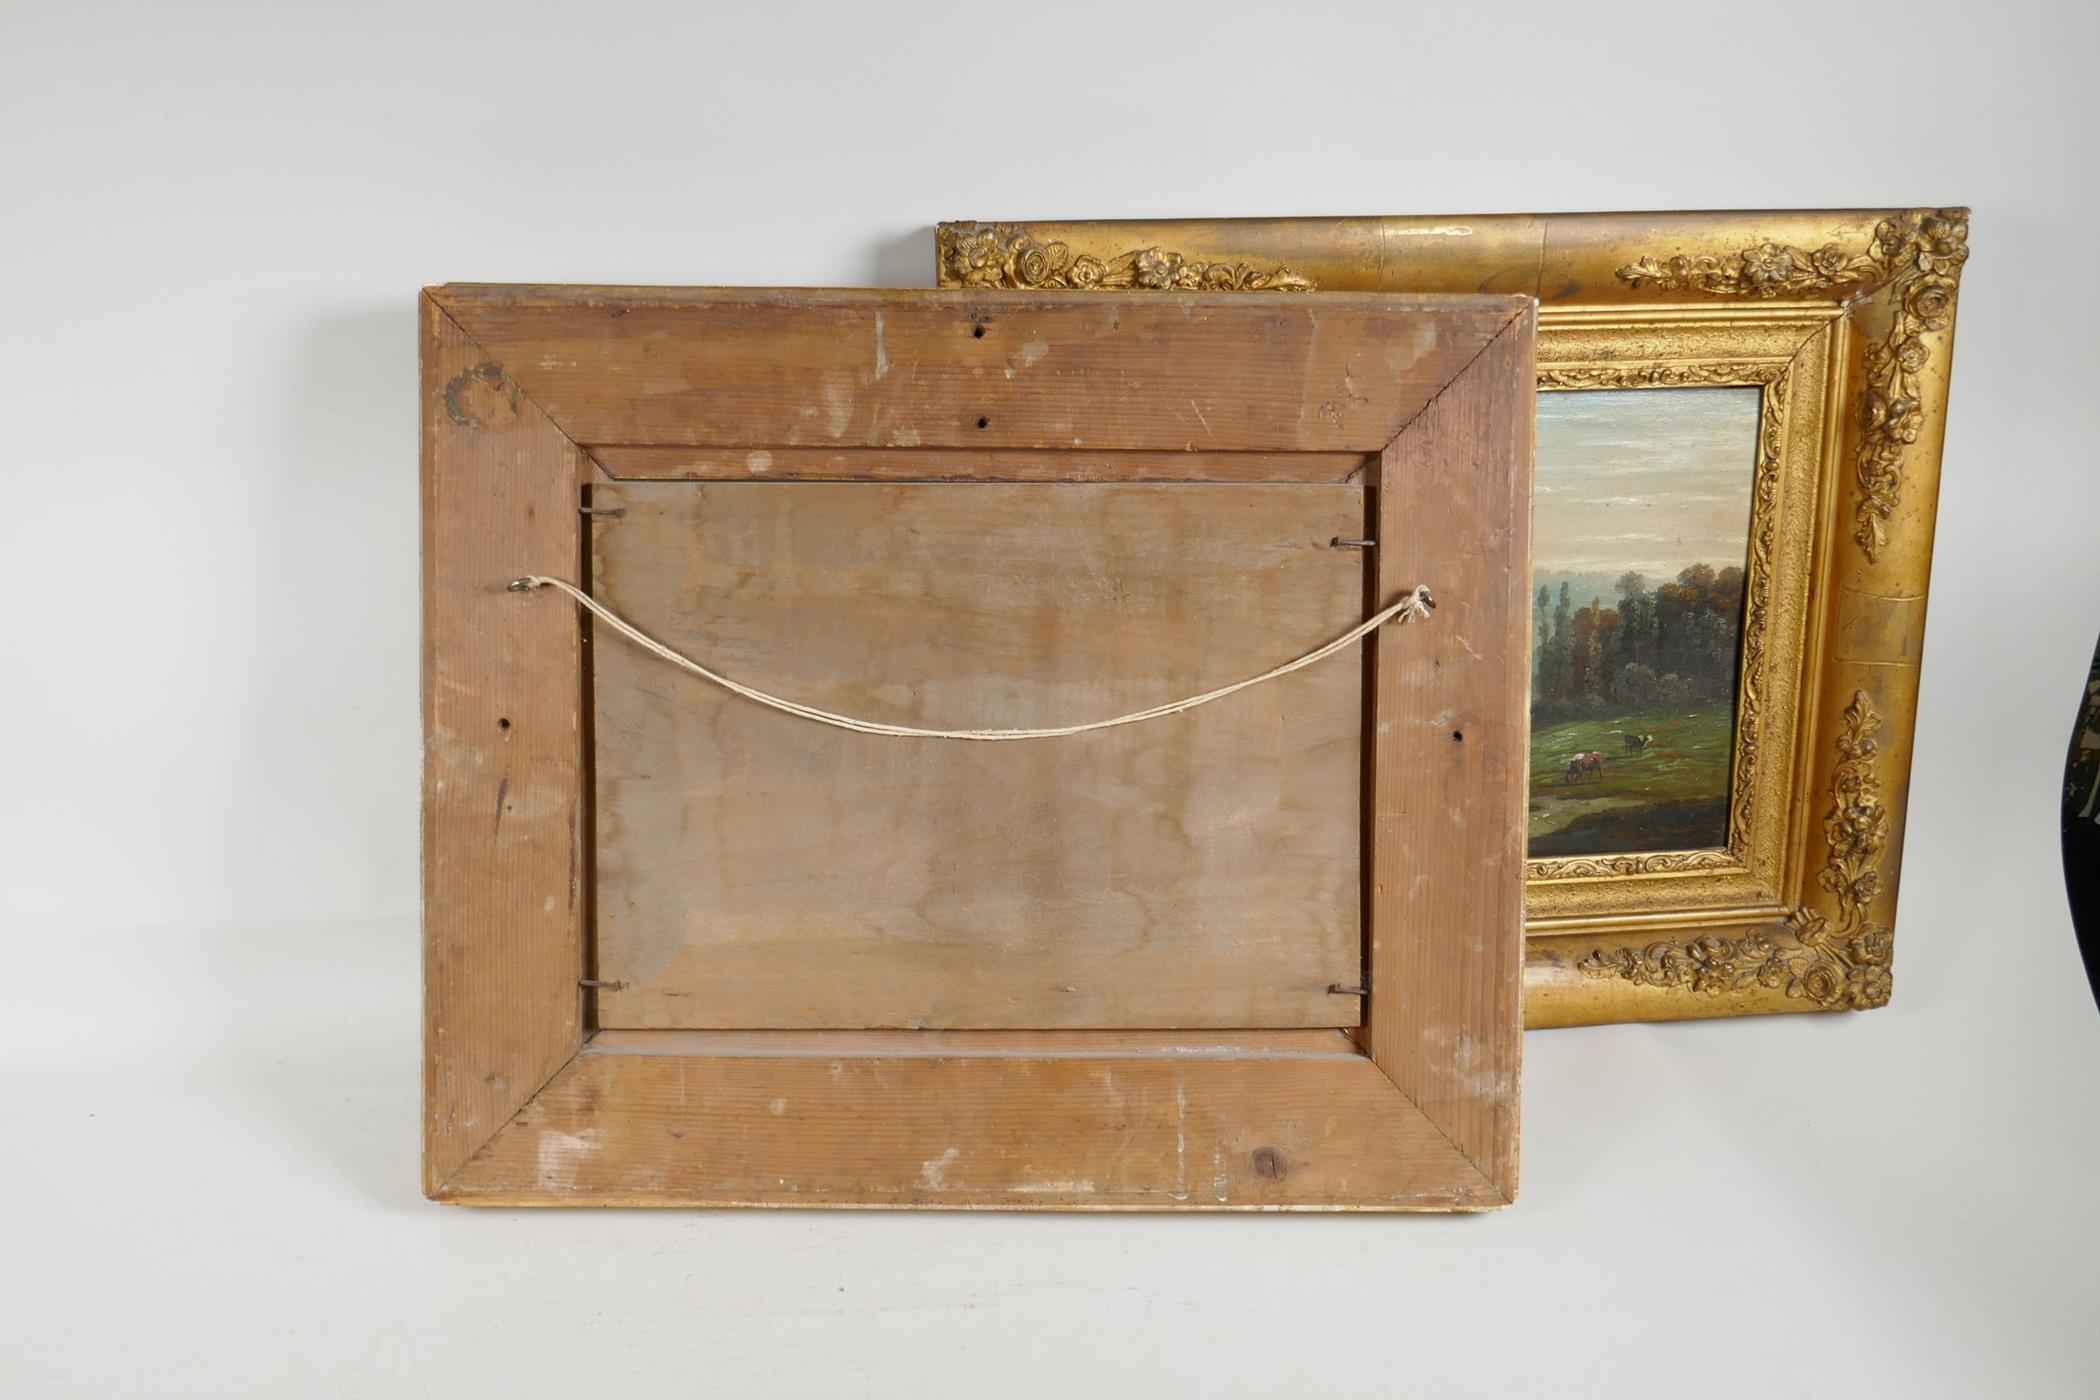 A pair of late C18th/early C19th classical landscape scenes, oil on poplar wood, 13" x 9" - Image 5 of 5